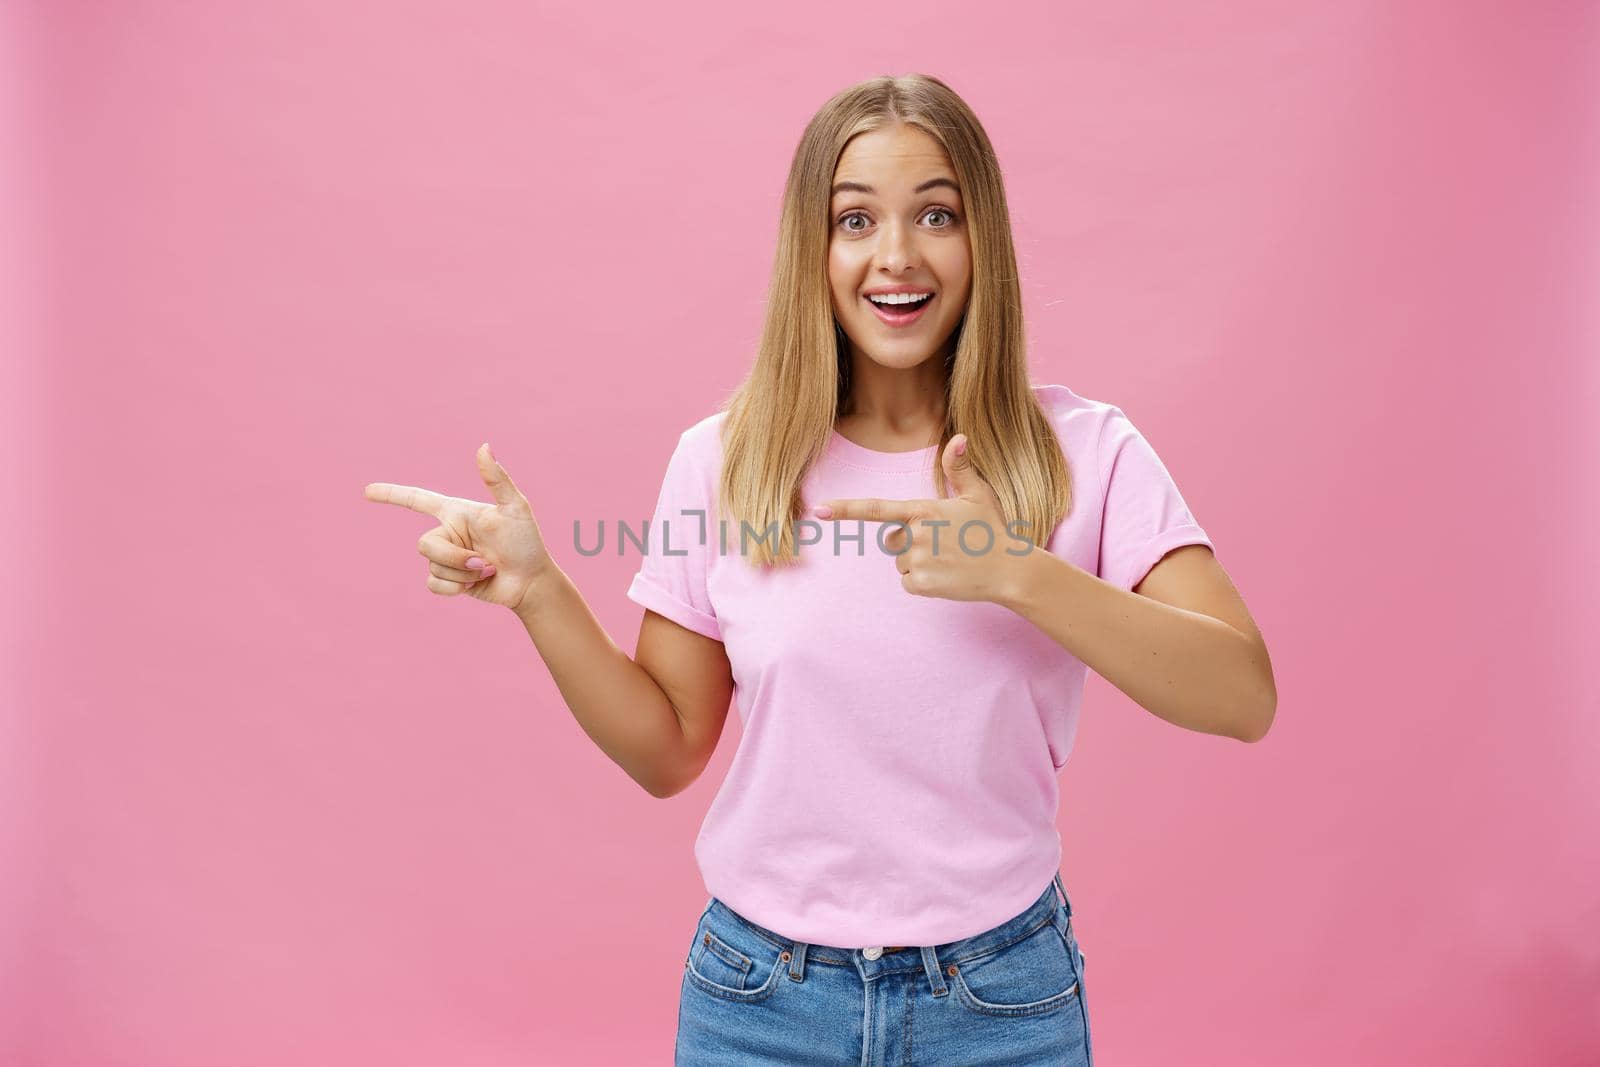 Portrait of charismatic and enthusiastic good-looking female with blonde hair and tanned skin in casual t-shirt pointing left smiling amused and delighted standing impressed over pink background. Lifestyle.